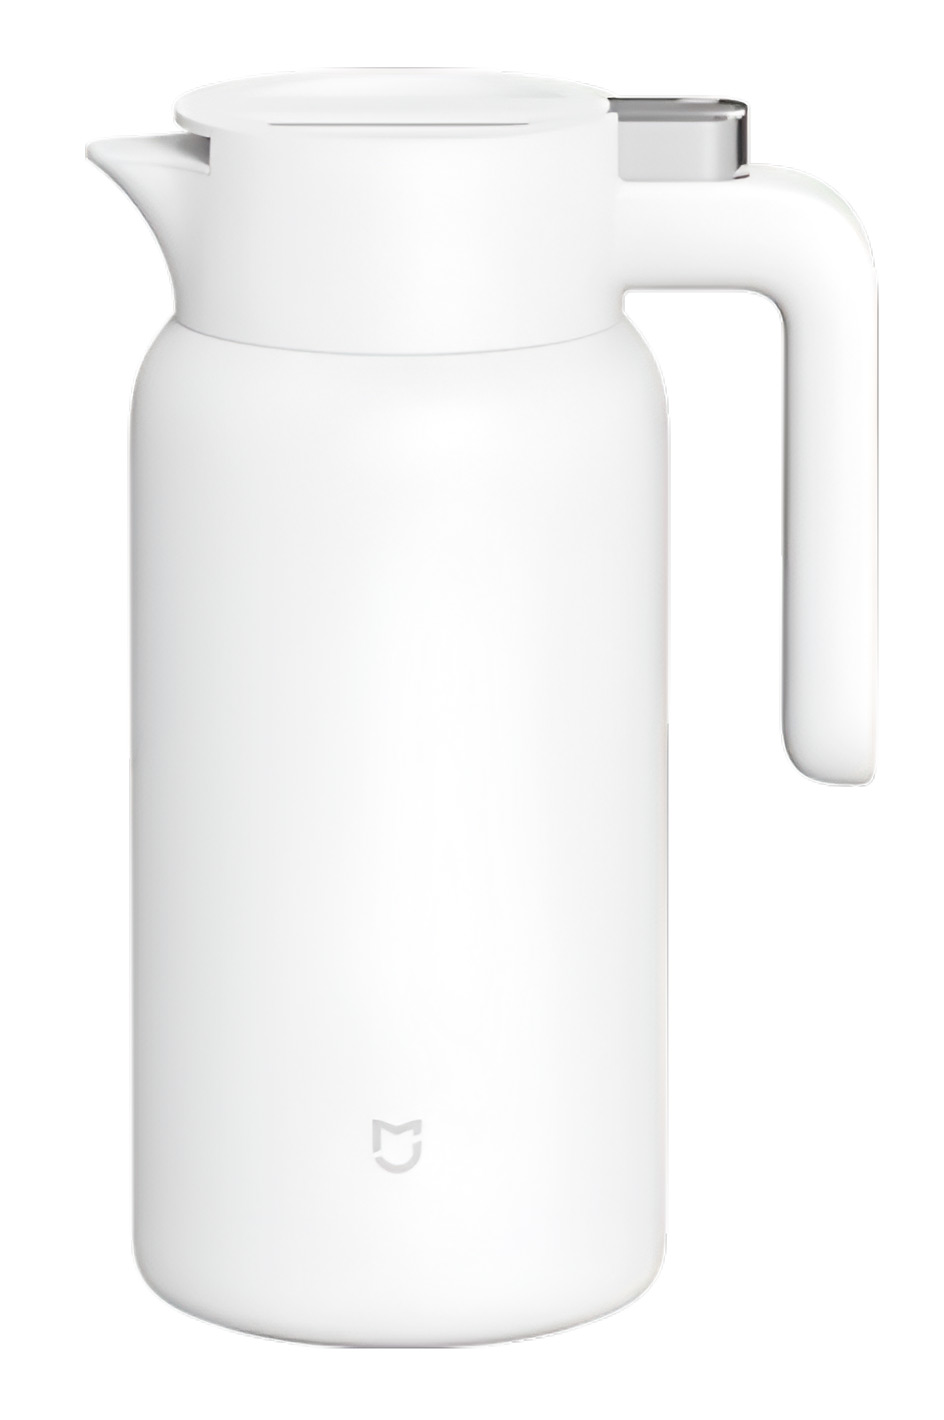 Термос Xiaomi Mijia Thermos Kettle 1.8L (MJBWH01PL) White термос xiaomi quange temperature display thermos kettle bwh 201 sj040401 white